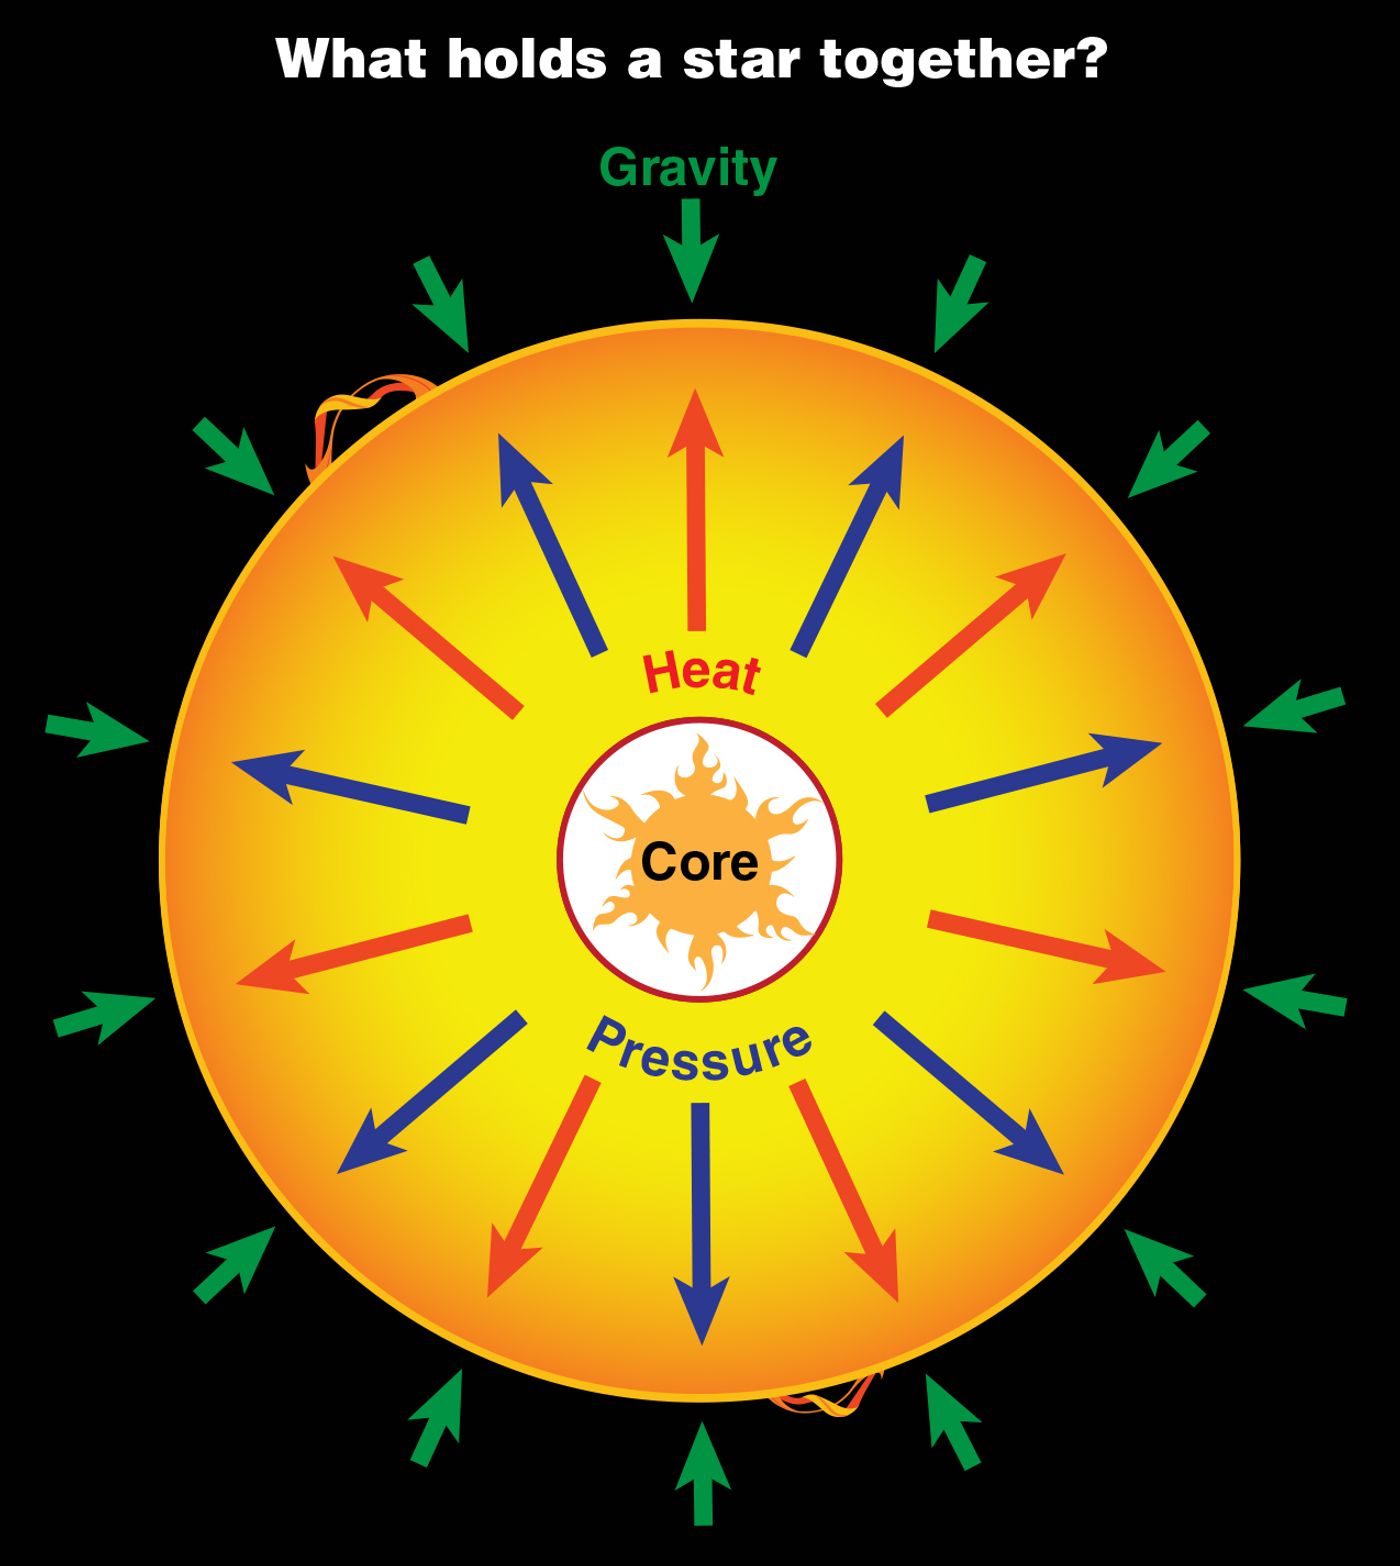 A diagram showing the balance between fusion and gravity in a star. (Credit: NASA)